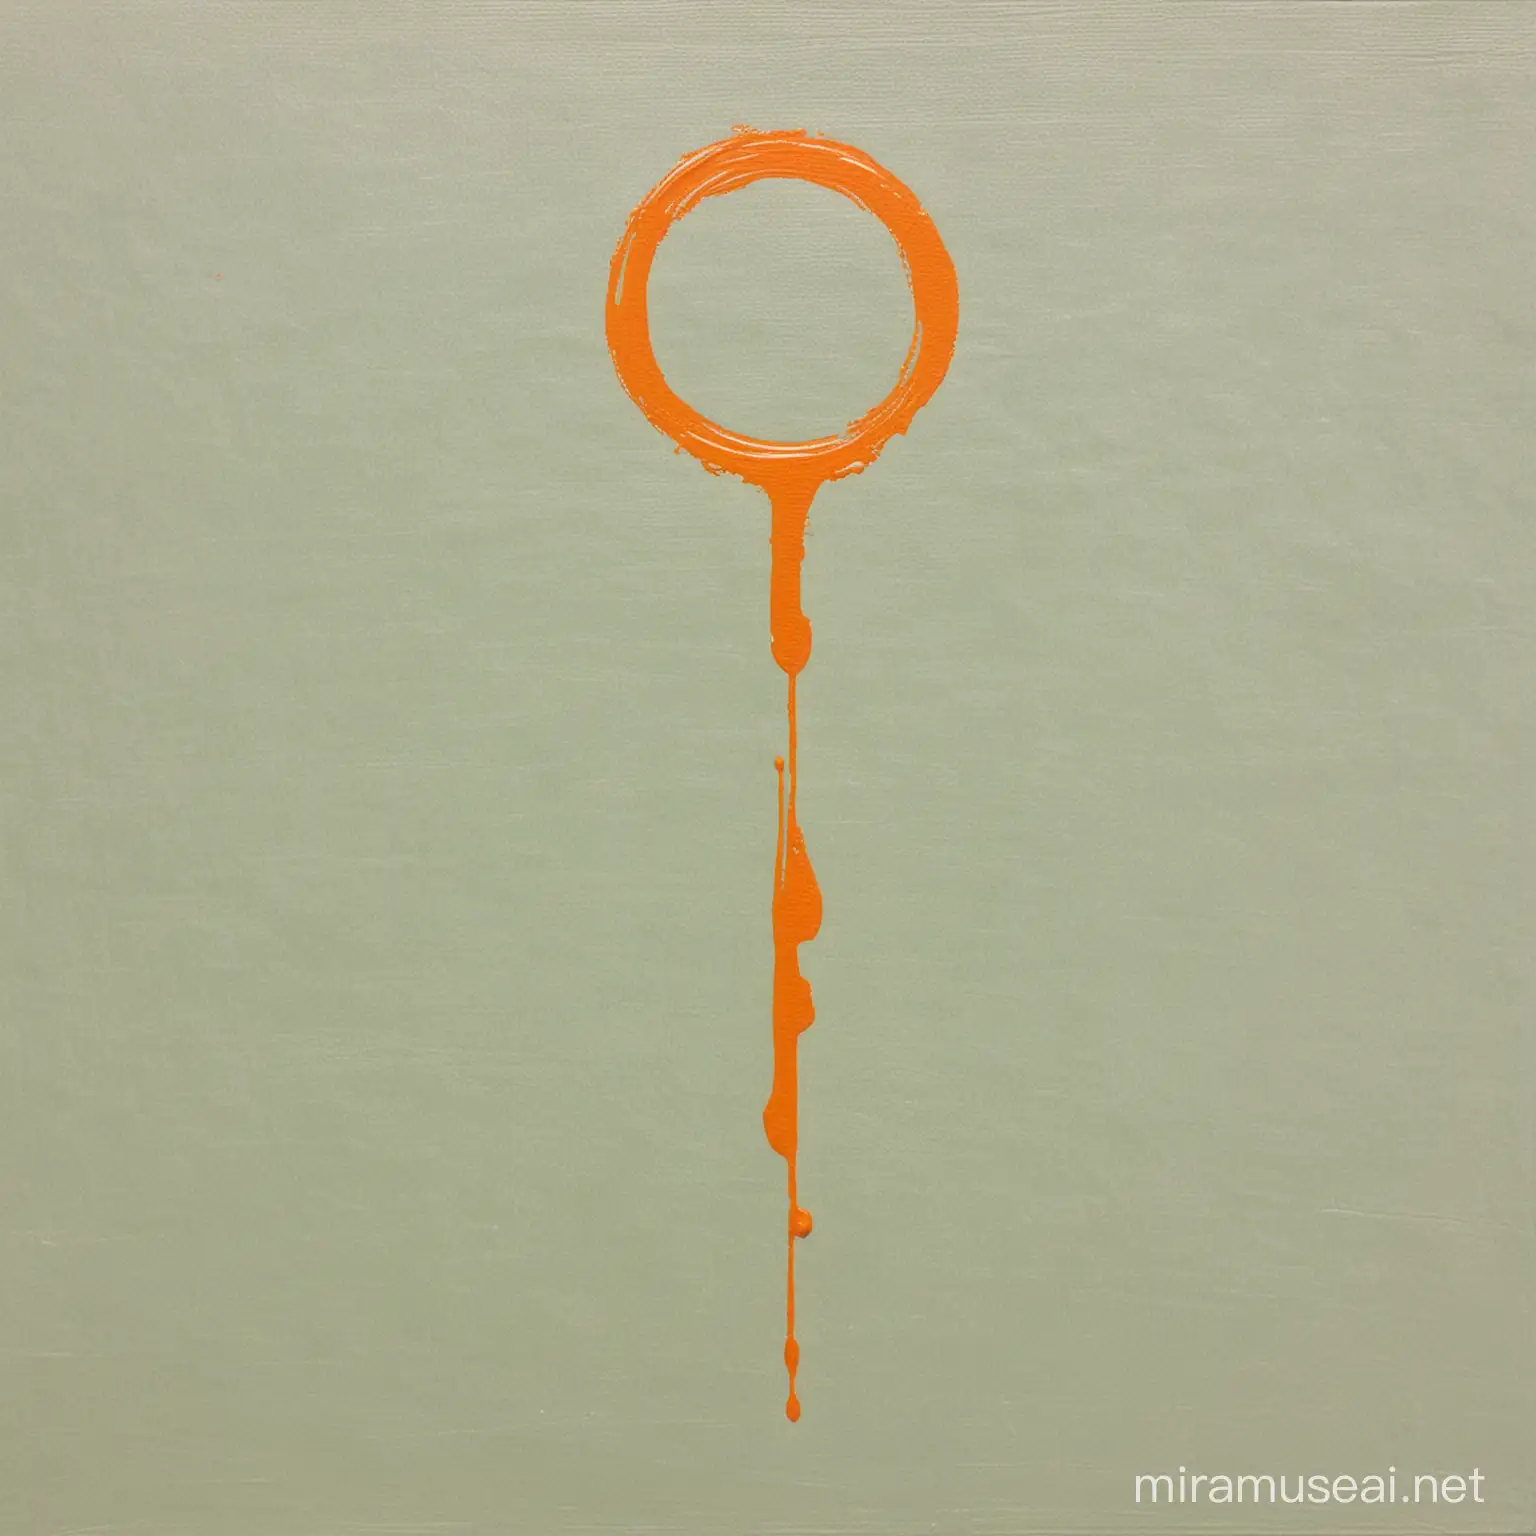 just a paint brush's line . vertical and  in pastel Greene . only one vertical 
line maybe a second one, on a canvas. with one orange circle drop
